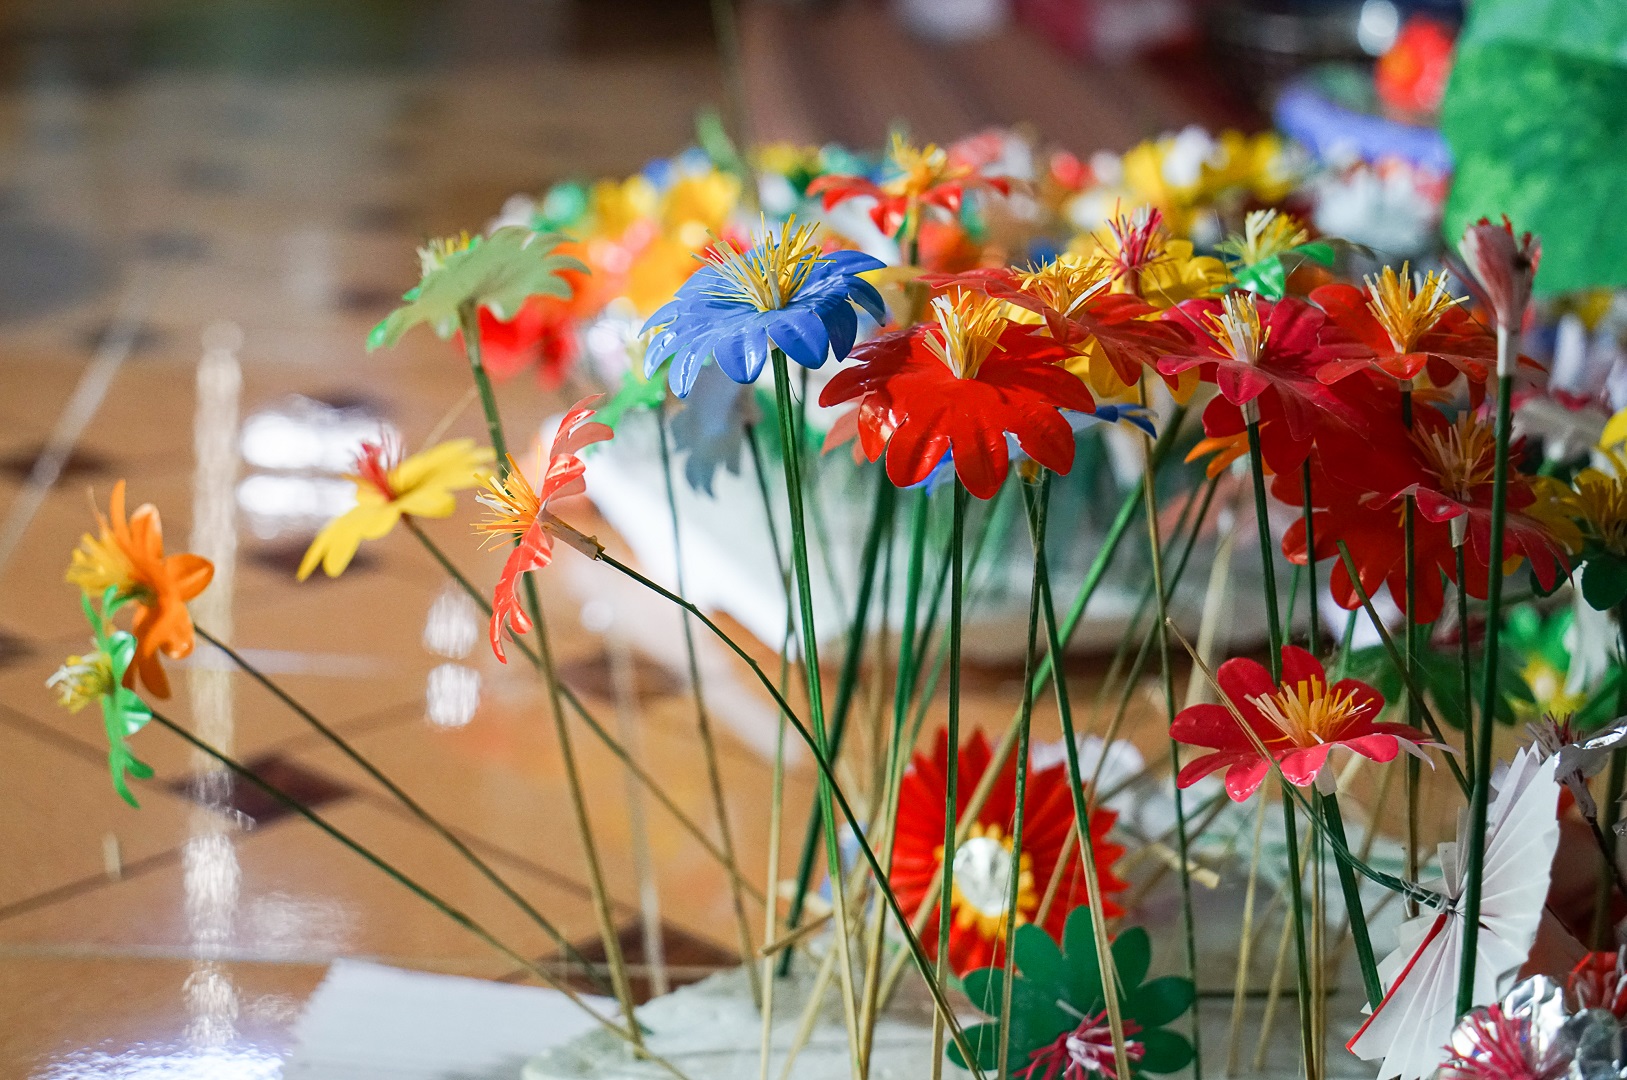 Paper flowers are ordered throughout the year, especially before the Tet holiday and festivals. Photo: Nguyen Trung Au / Tuoi Tre News